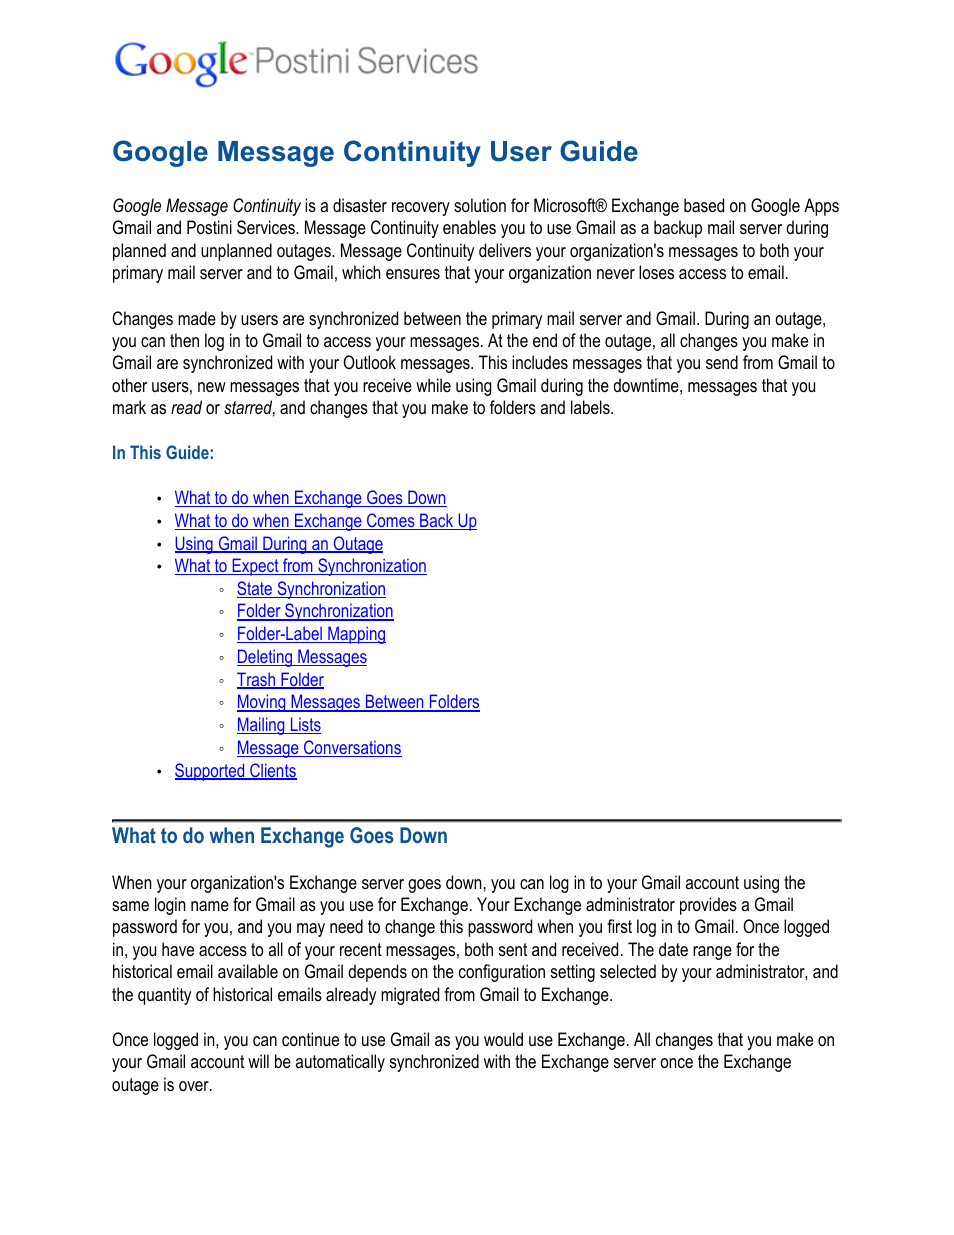 Message Continuity User Guide